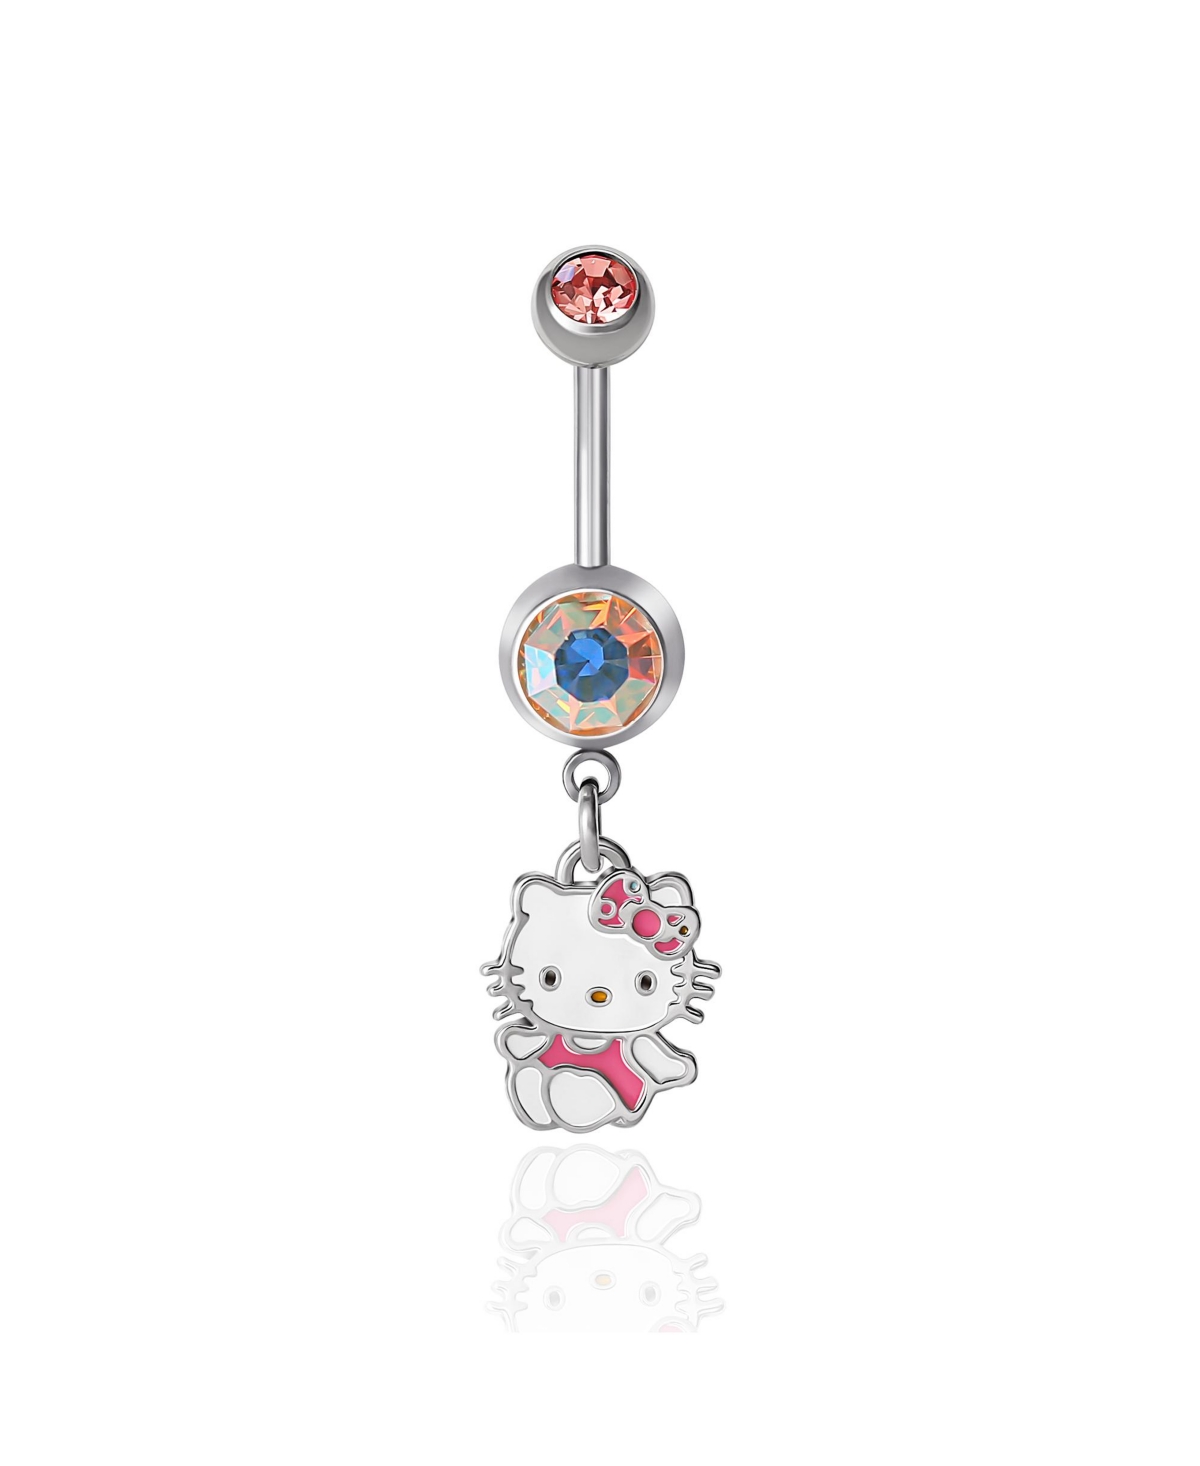 Sanrio Hello Kitty Authentic Officially Licensed Womens 14G Stainless Steel Light Rose Crystal Belly Button Ring - Hello Kitty Dangle - Pink, white